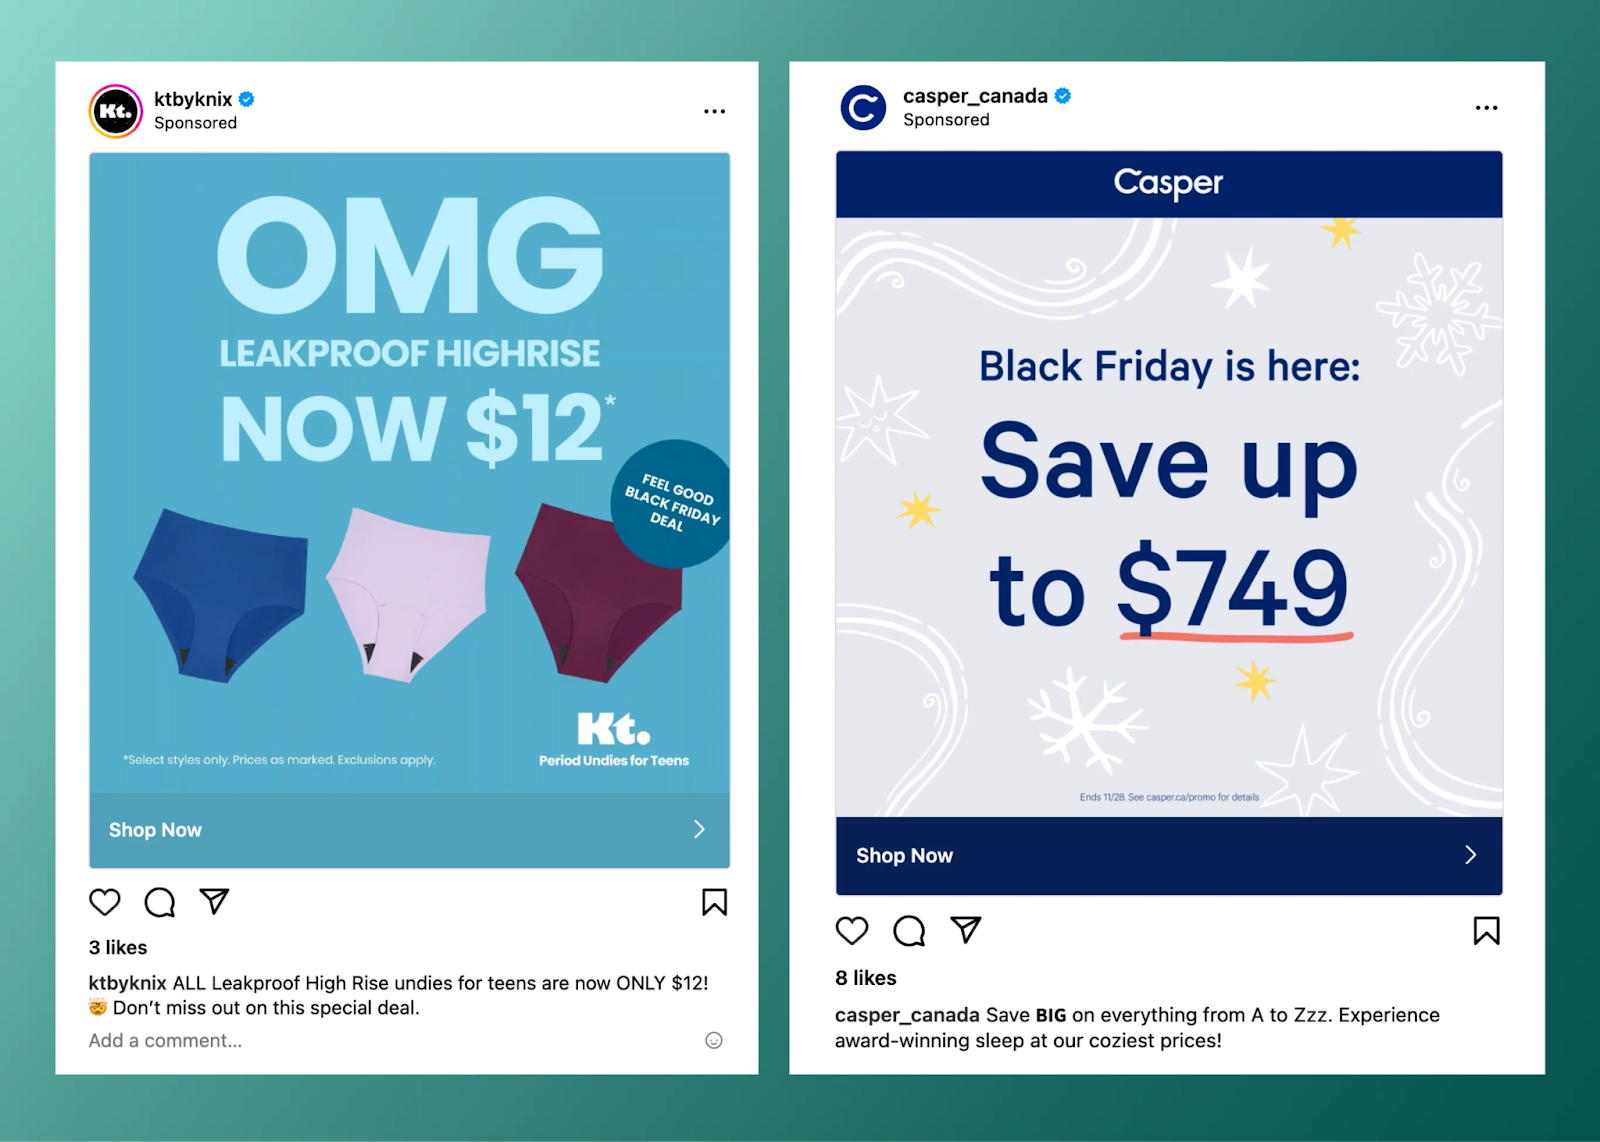 Snapshots of @ktbyknix and @casper_canada sponsored Instagram post ad campaigns promoting a sale on underwear and a Black Friday sale promo respectively